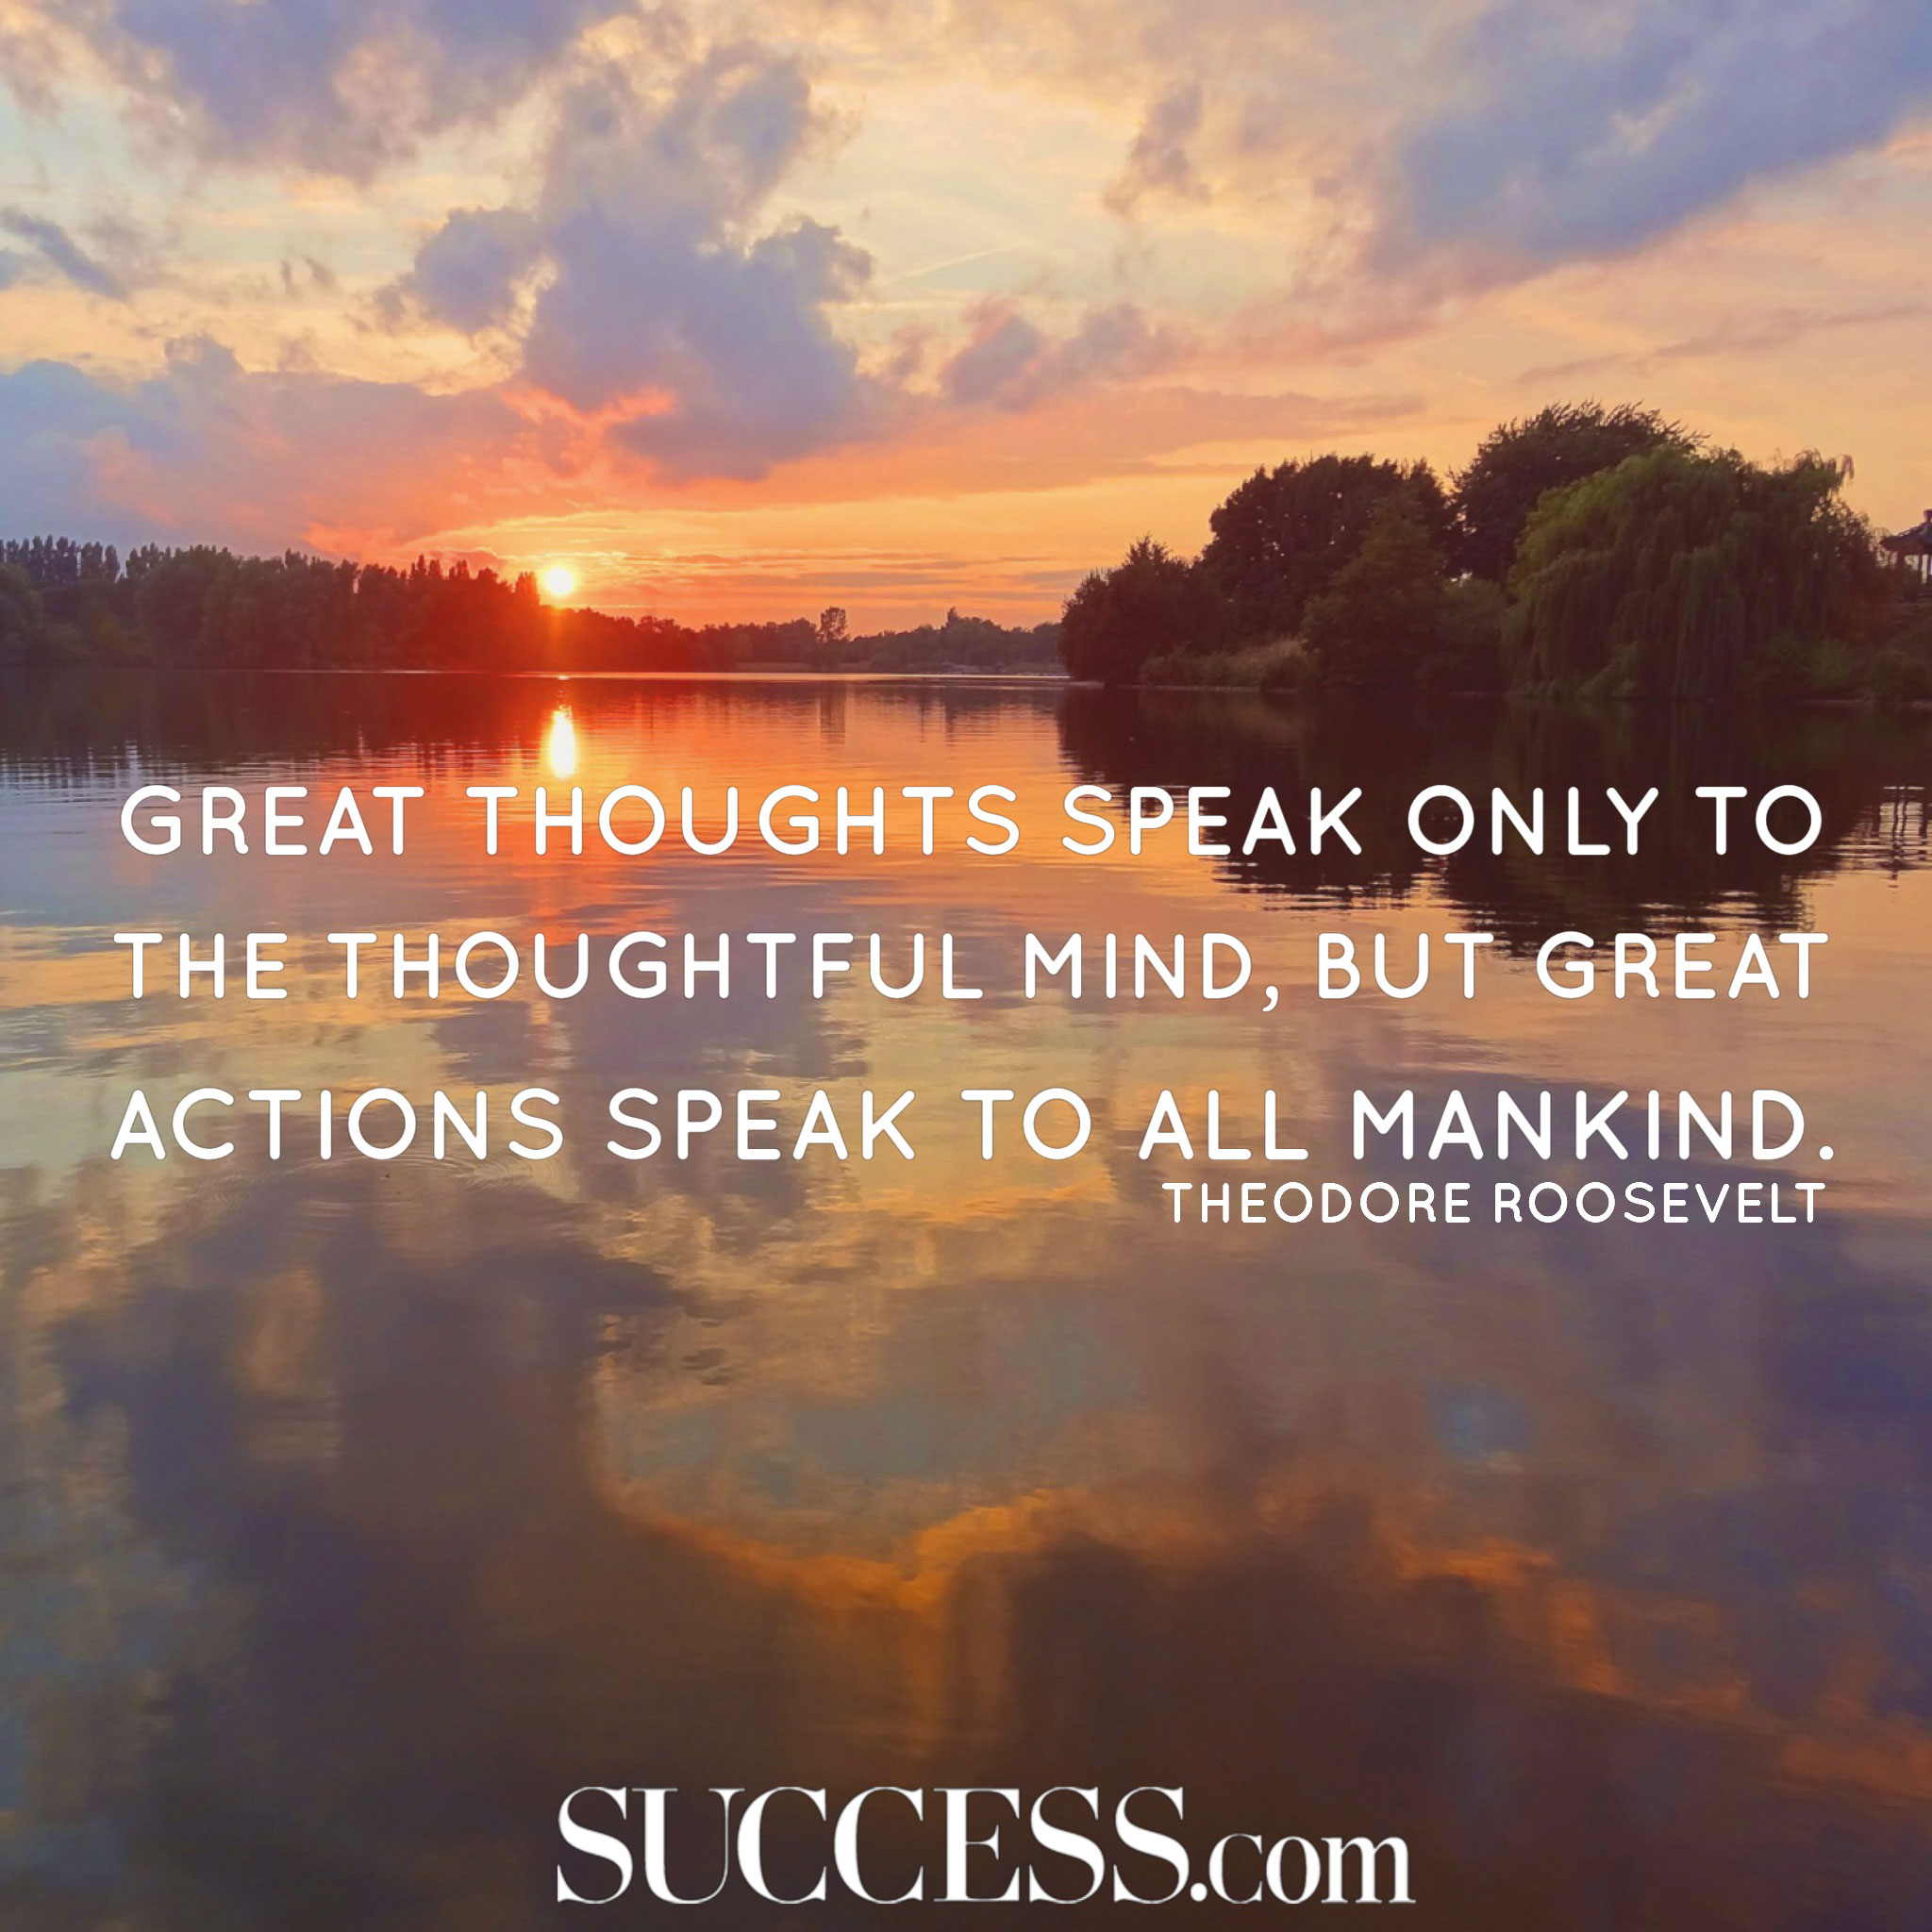 19 Powerful Quotes to Inspire Greatness